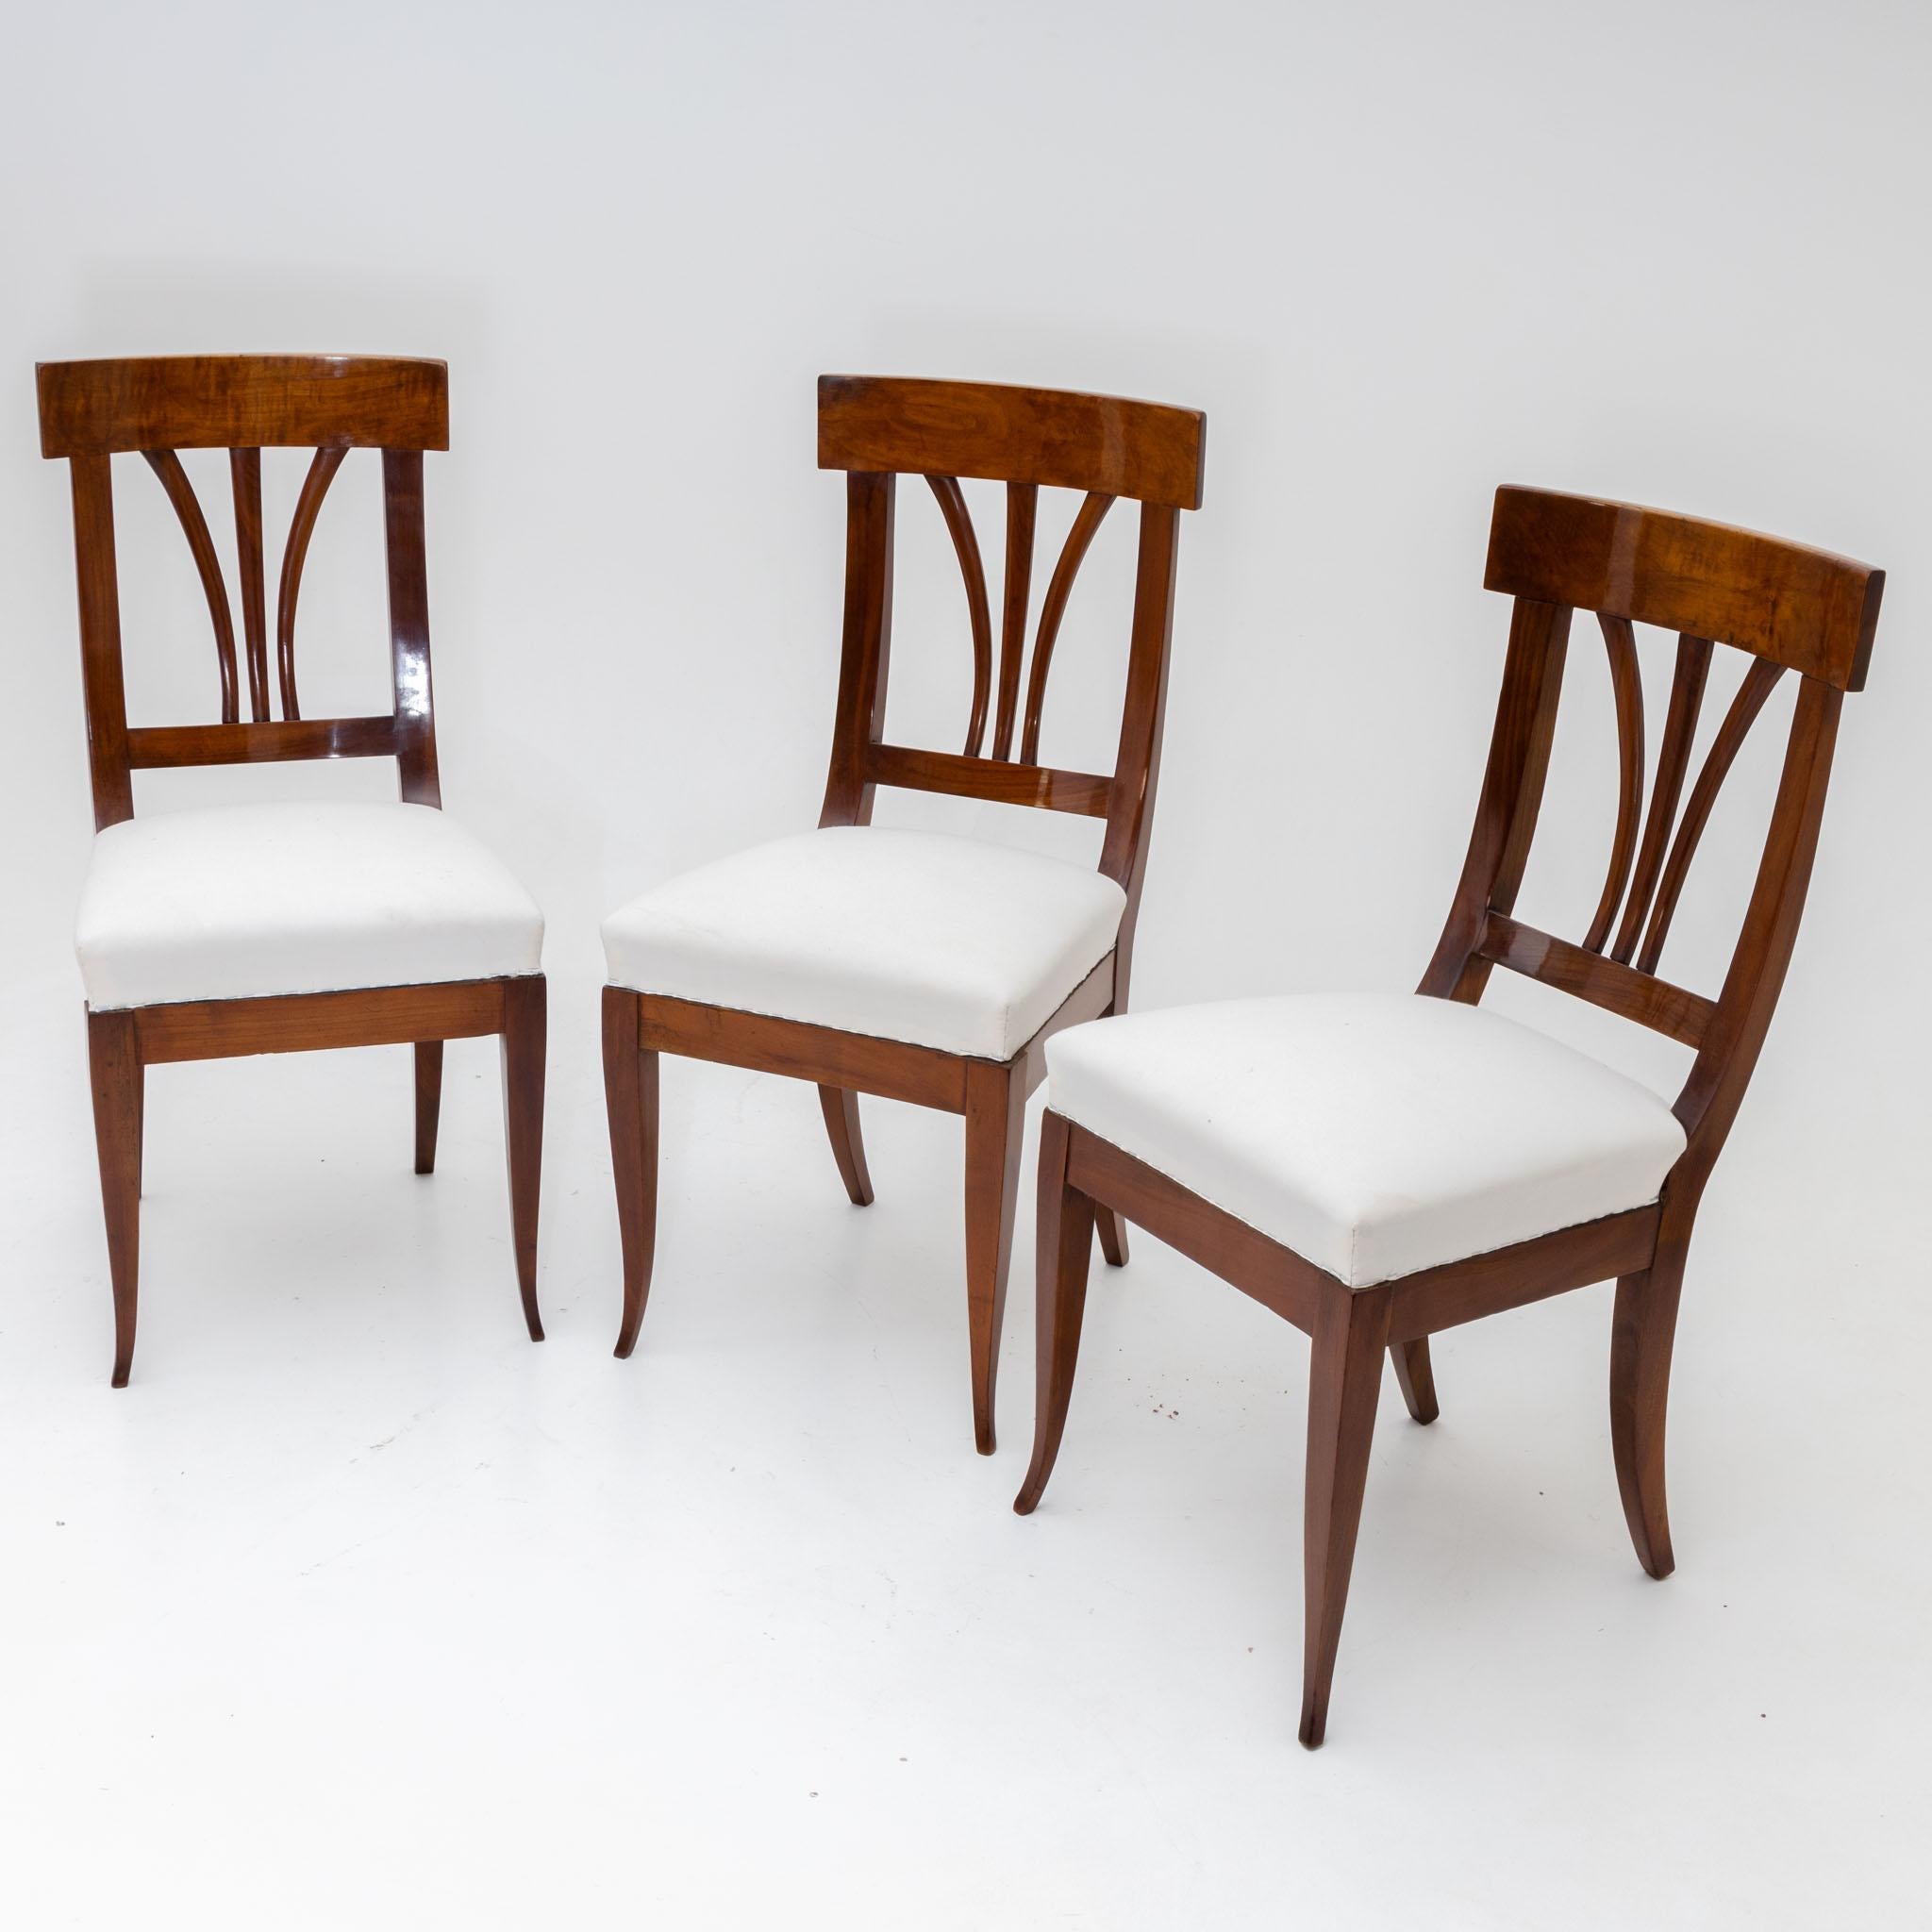 Set of Three Biedermeier Dining Room Chairs, Germany, circa 1820 In Good Condition For Sale In Greding, DE